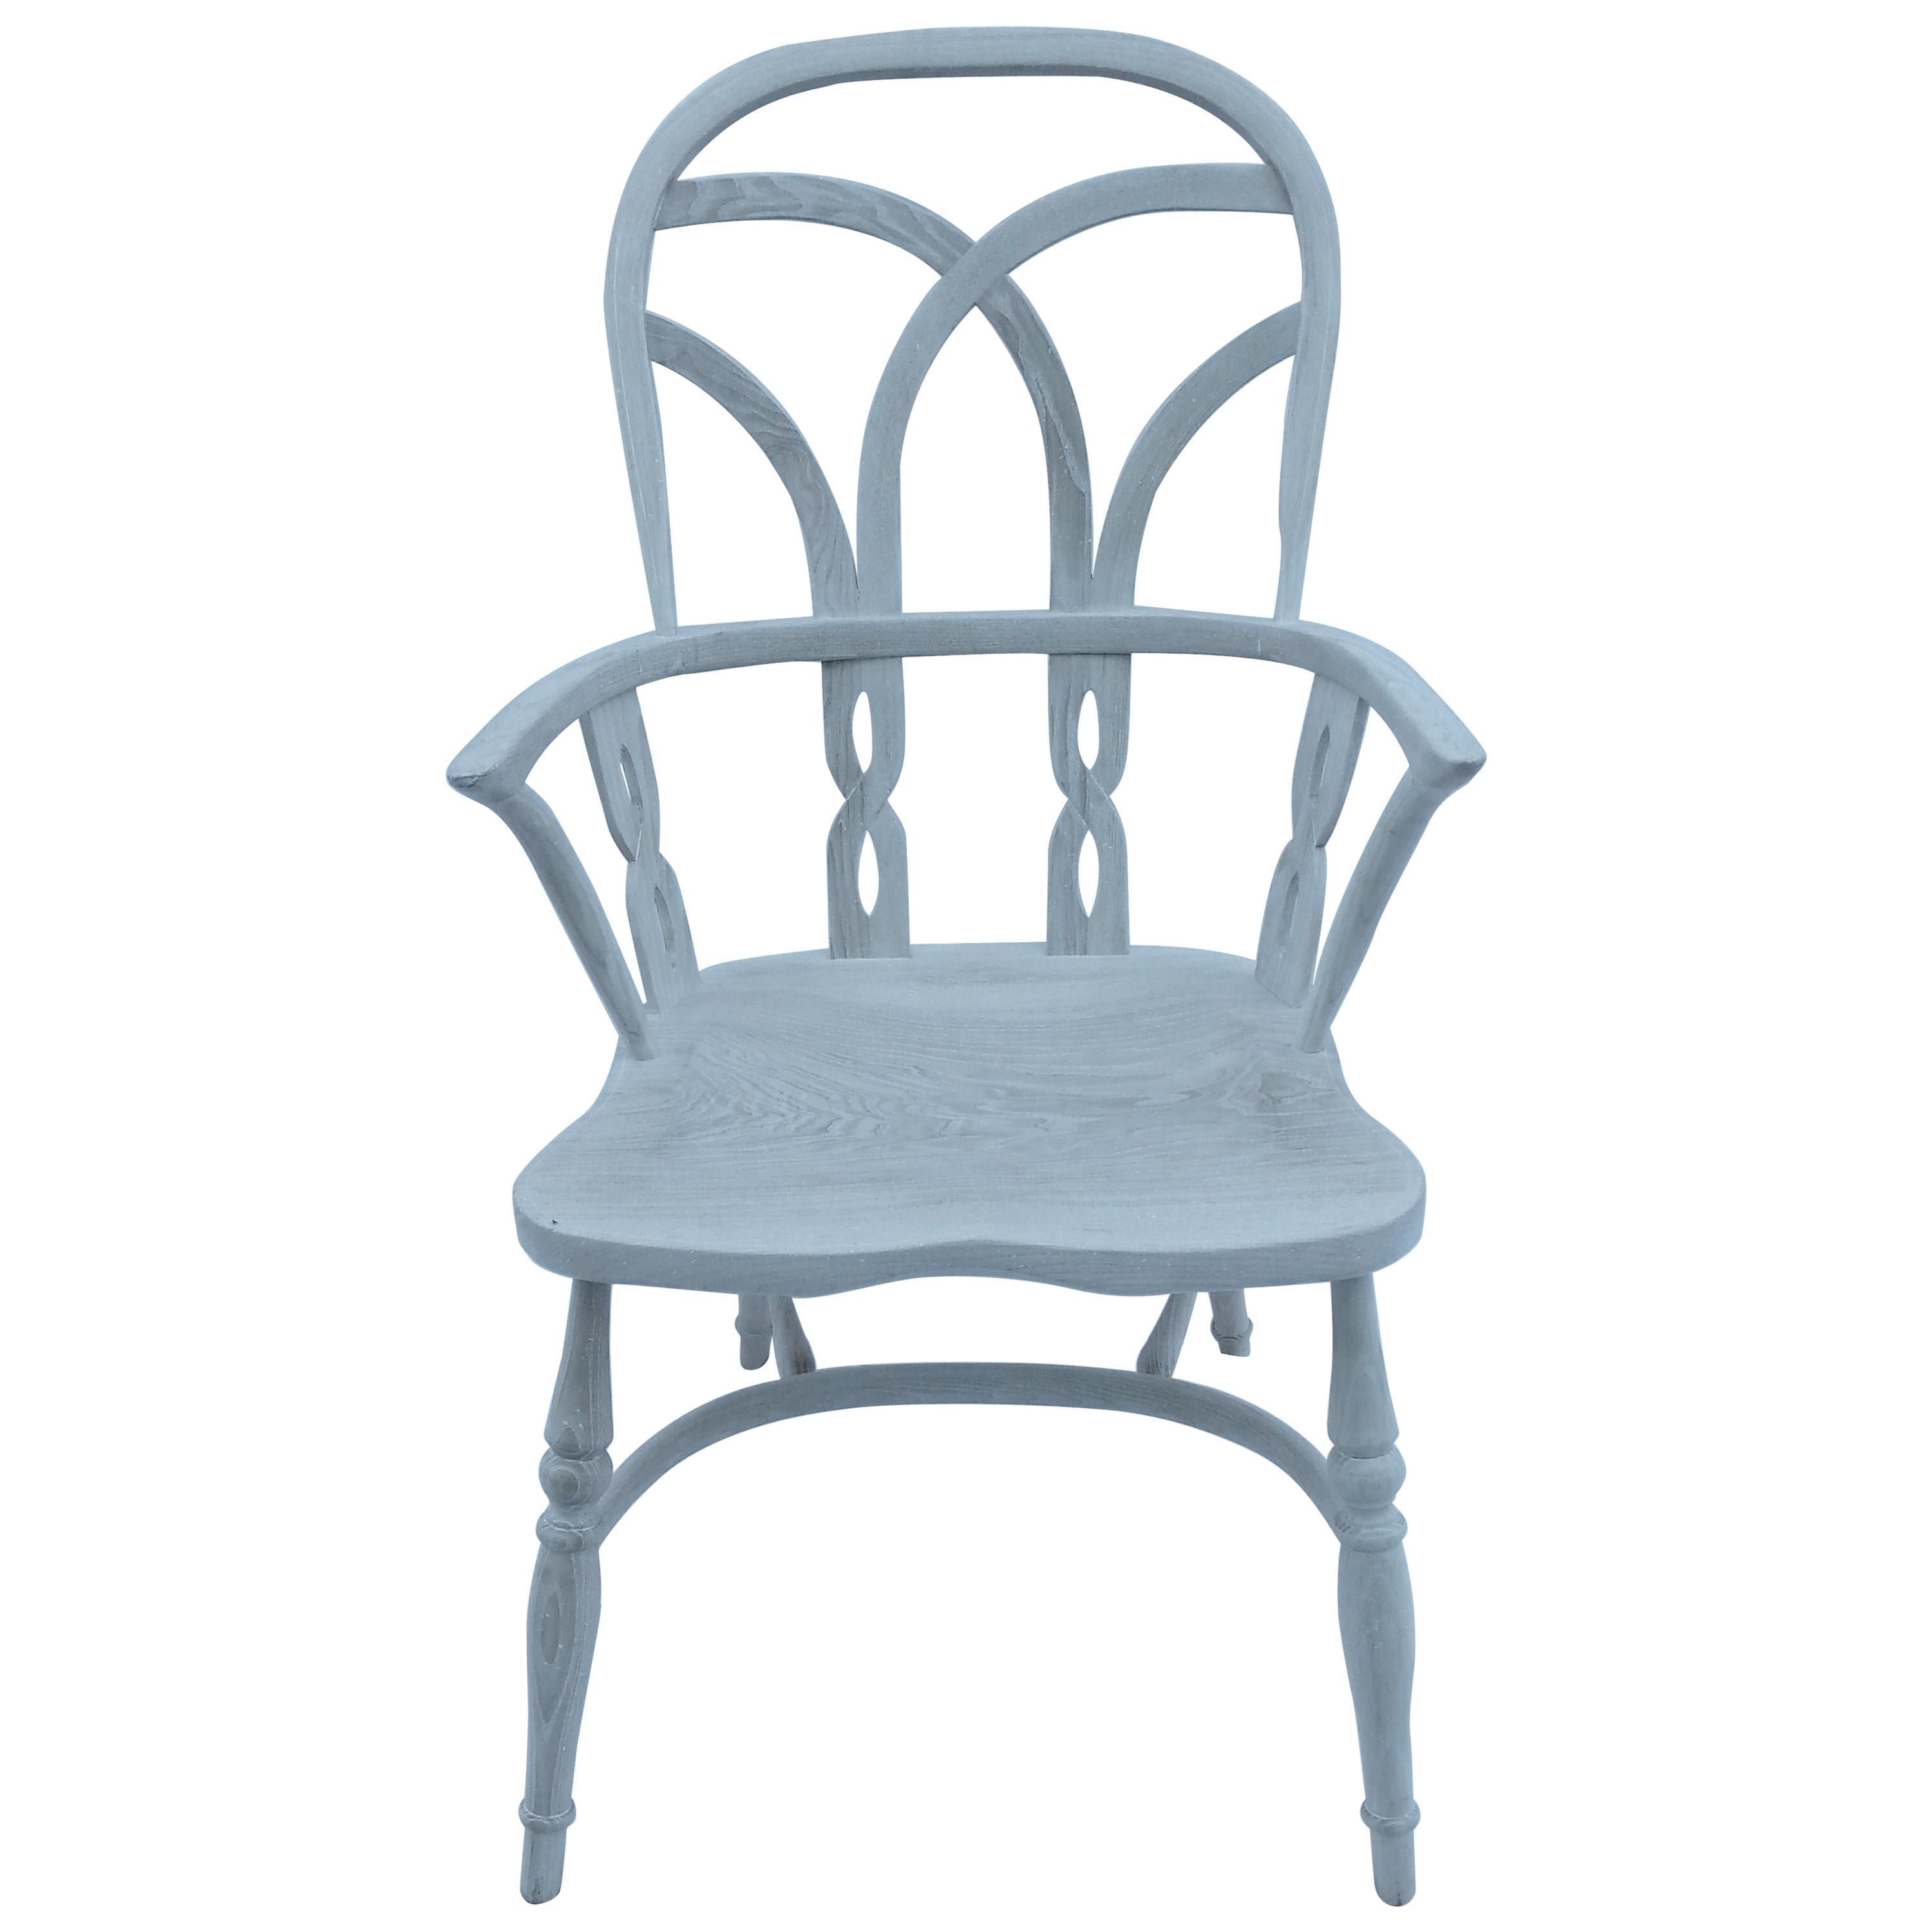 Reproduction Gothic Interlace Whitewash Chair with Arms